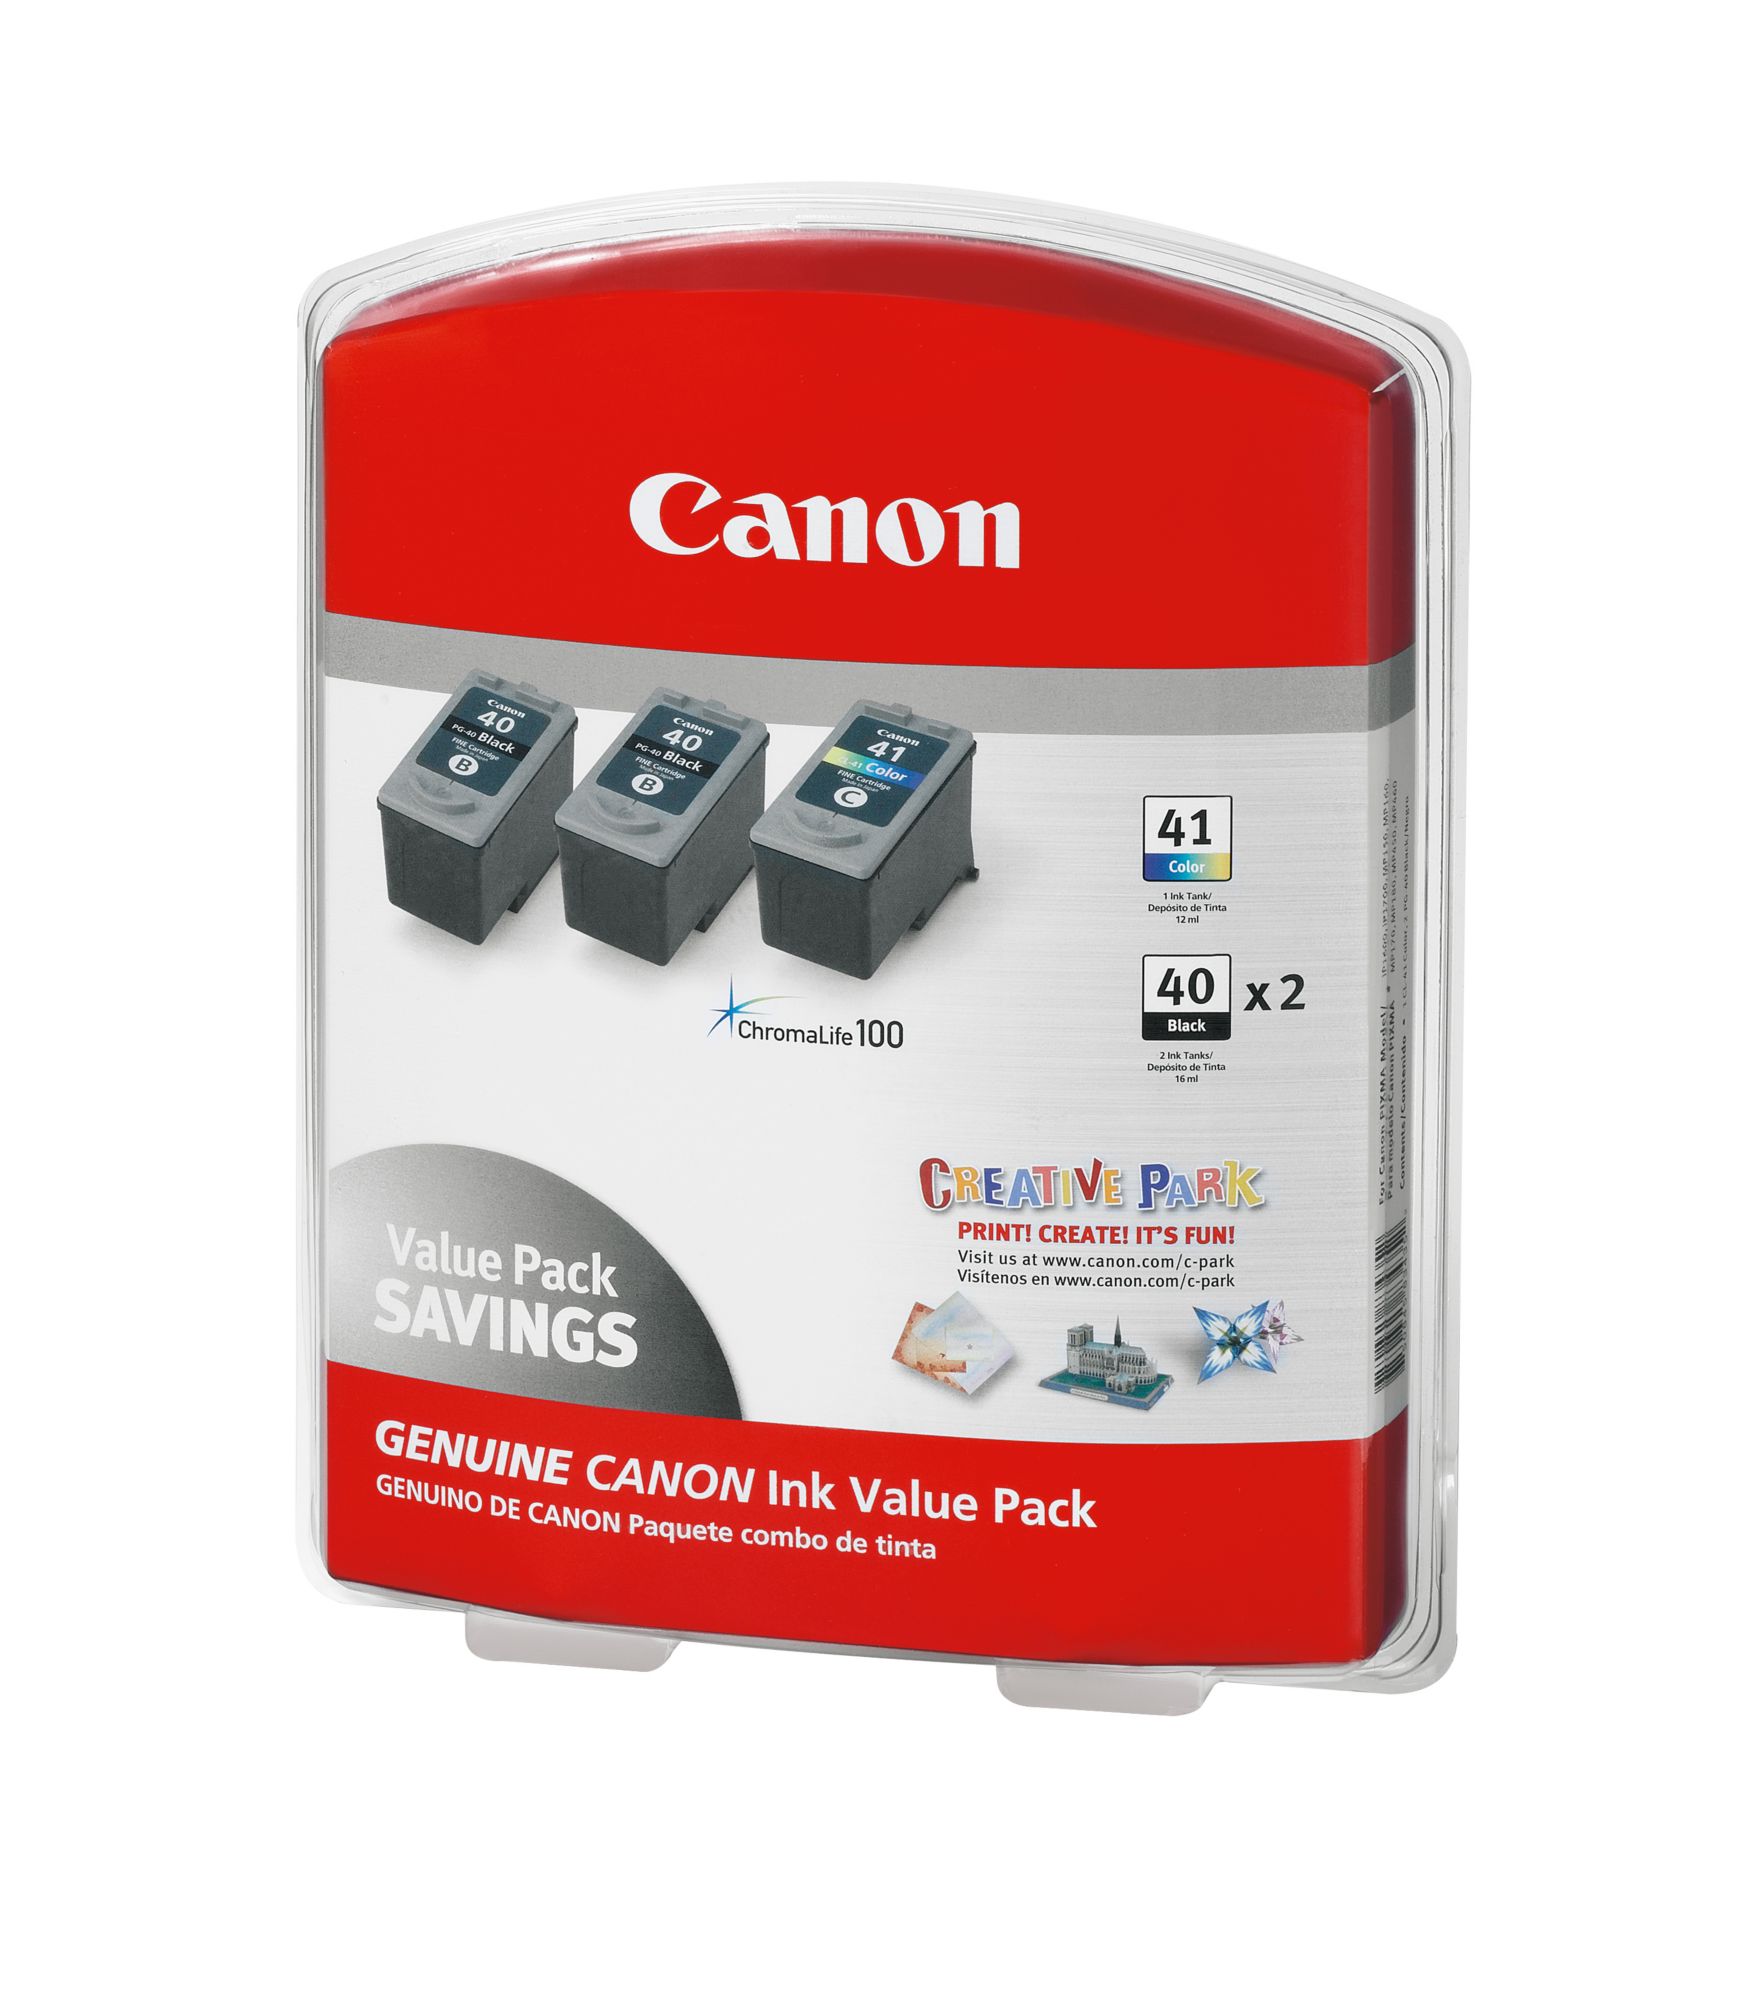 Canon iPG-40 and CL-41 Combo Ink Cartridges, 3 Pack